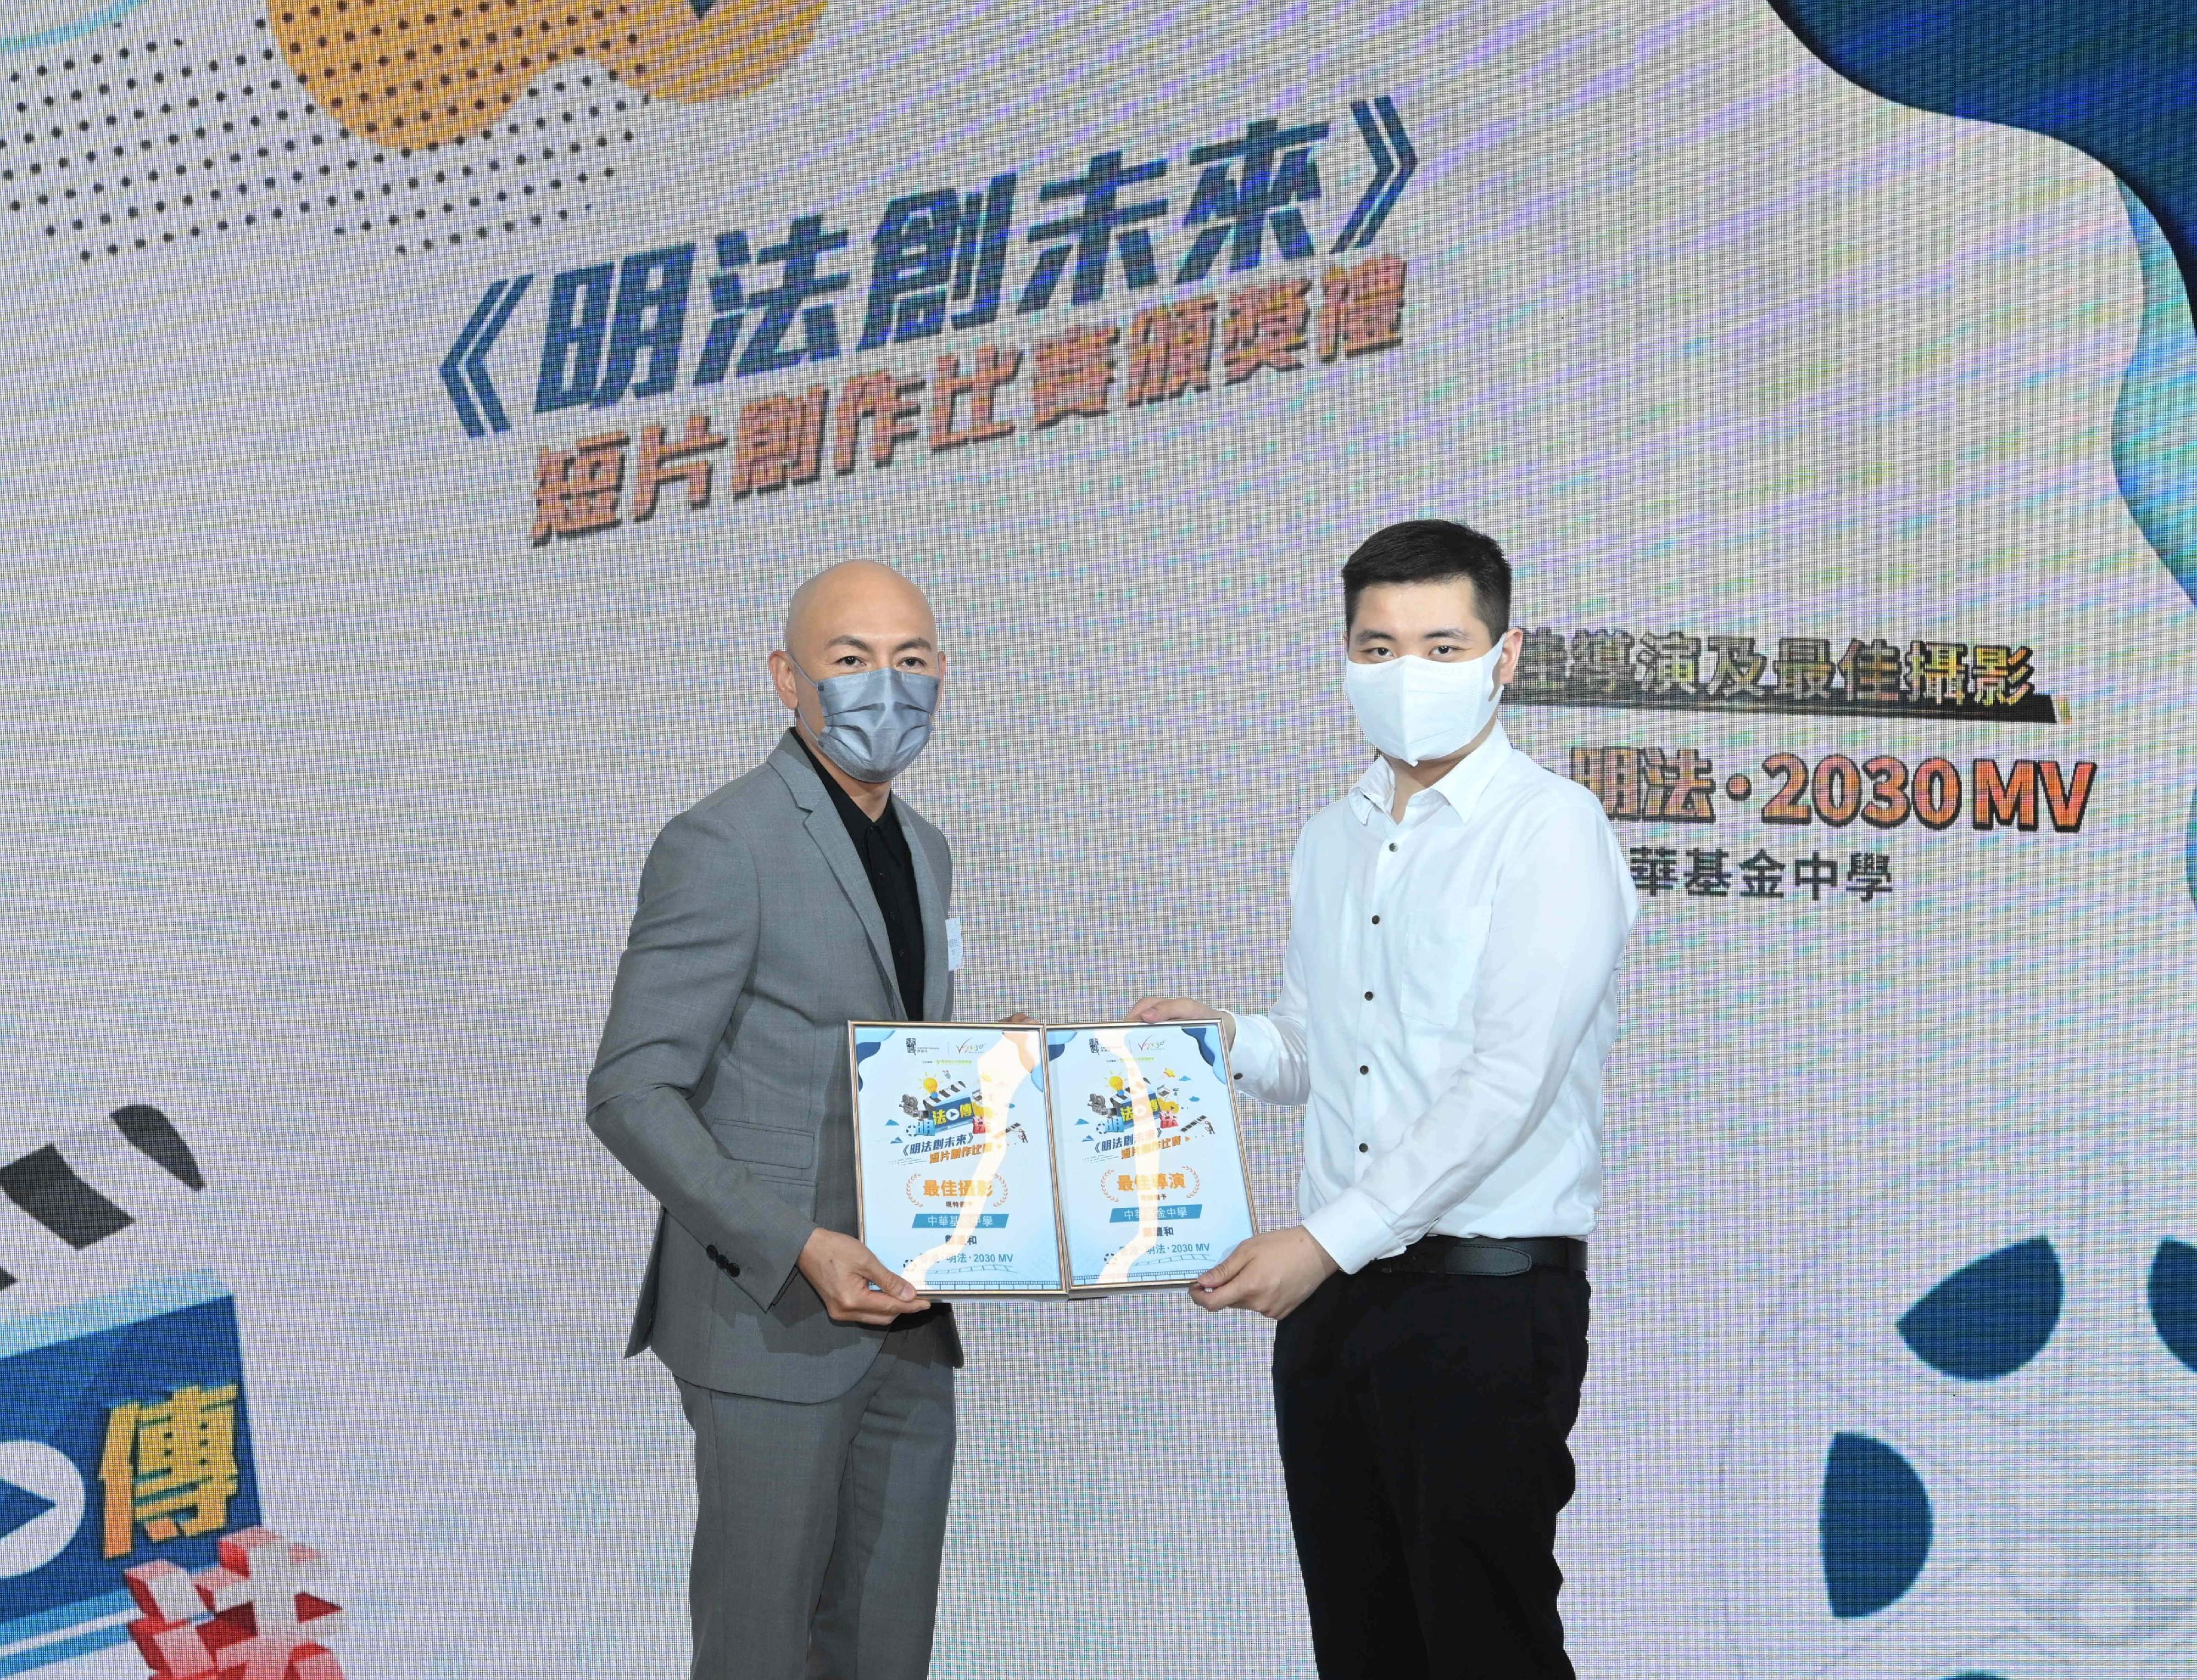 The "Key to the Future" Short Video Competition Award Presentation Ceremony organised by the Department of Justice was held today (May 7). Picture shows renowned director Dante Lam, presenting award to the best director.